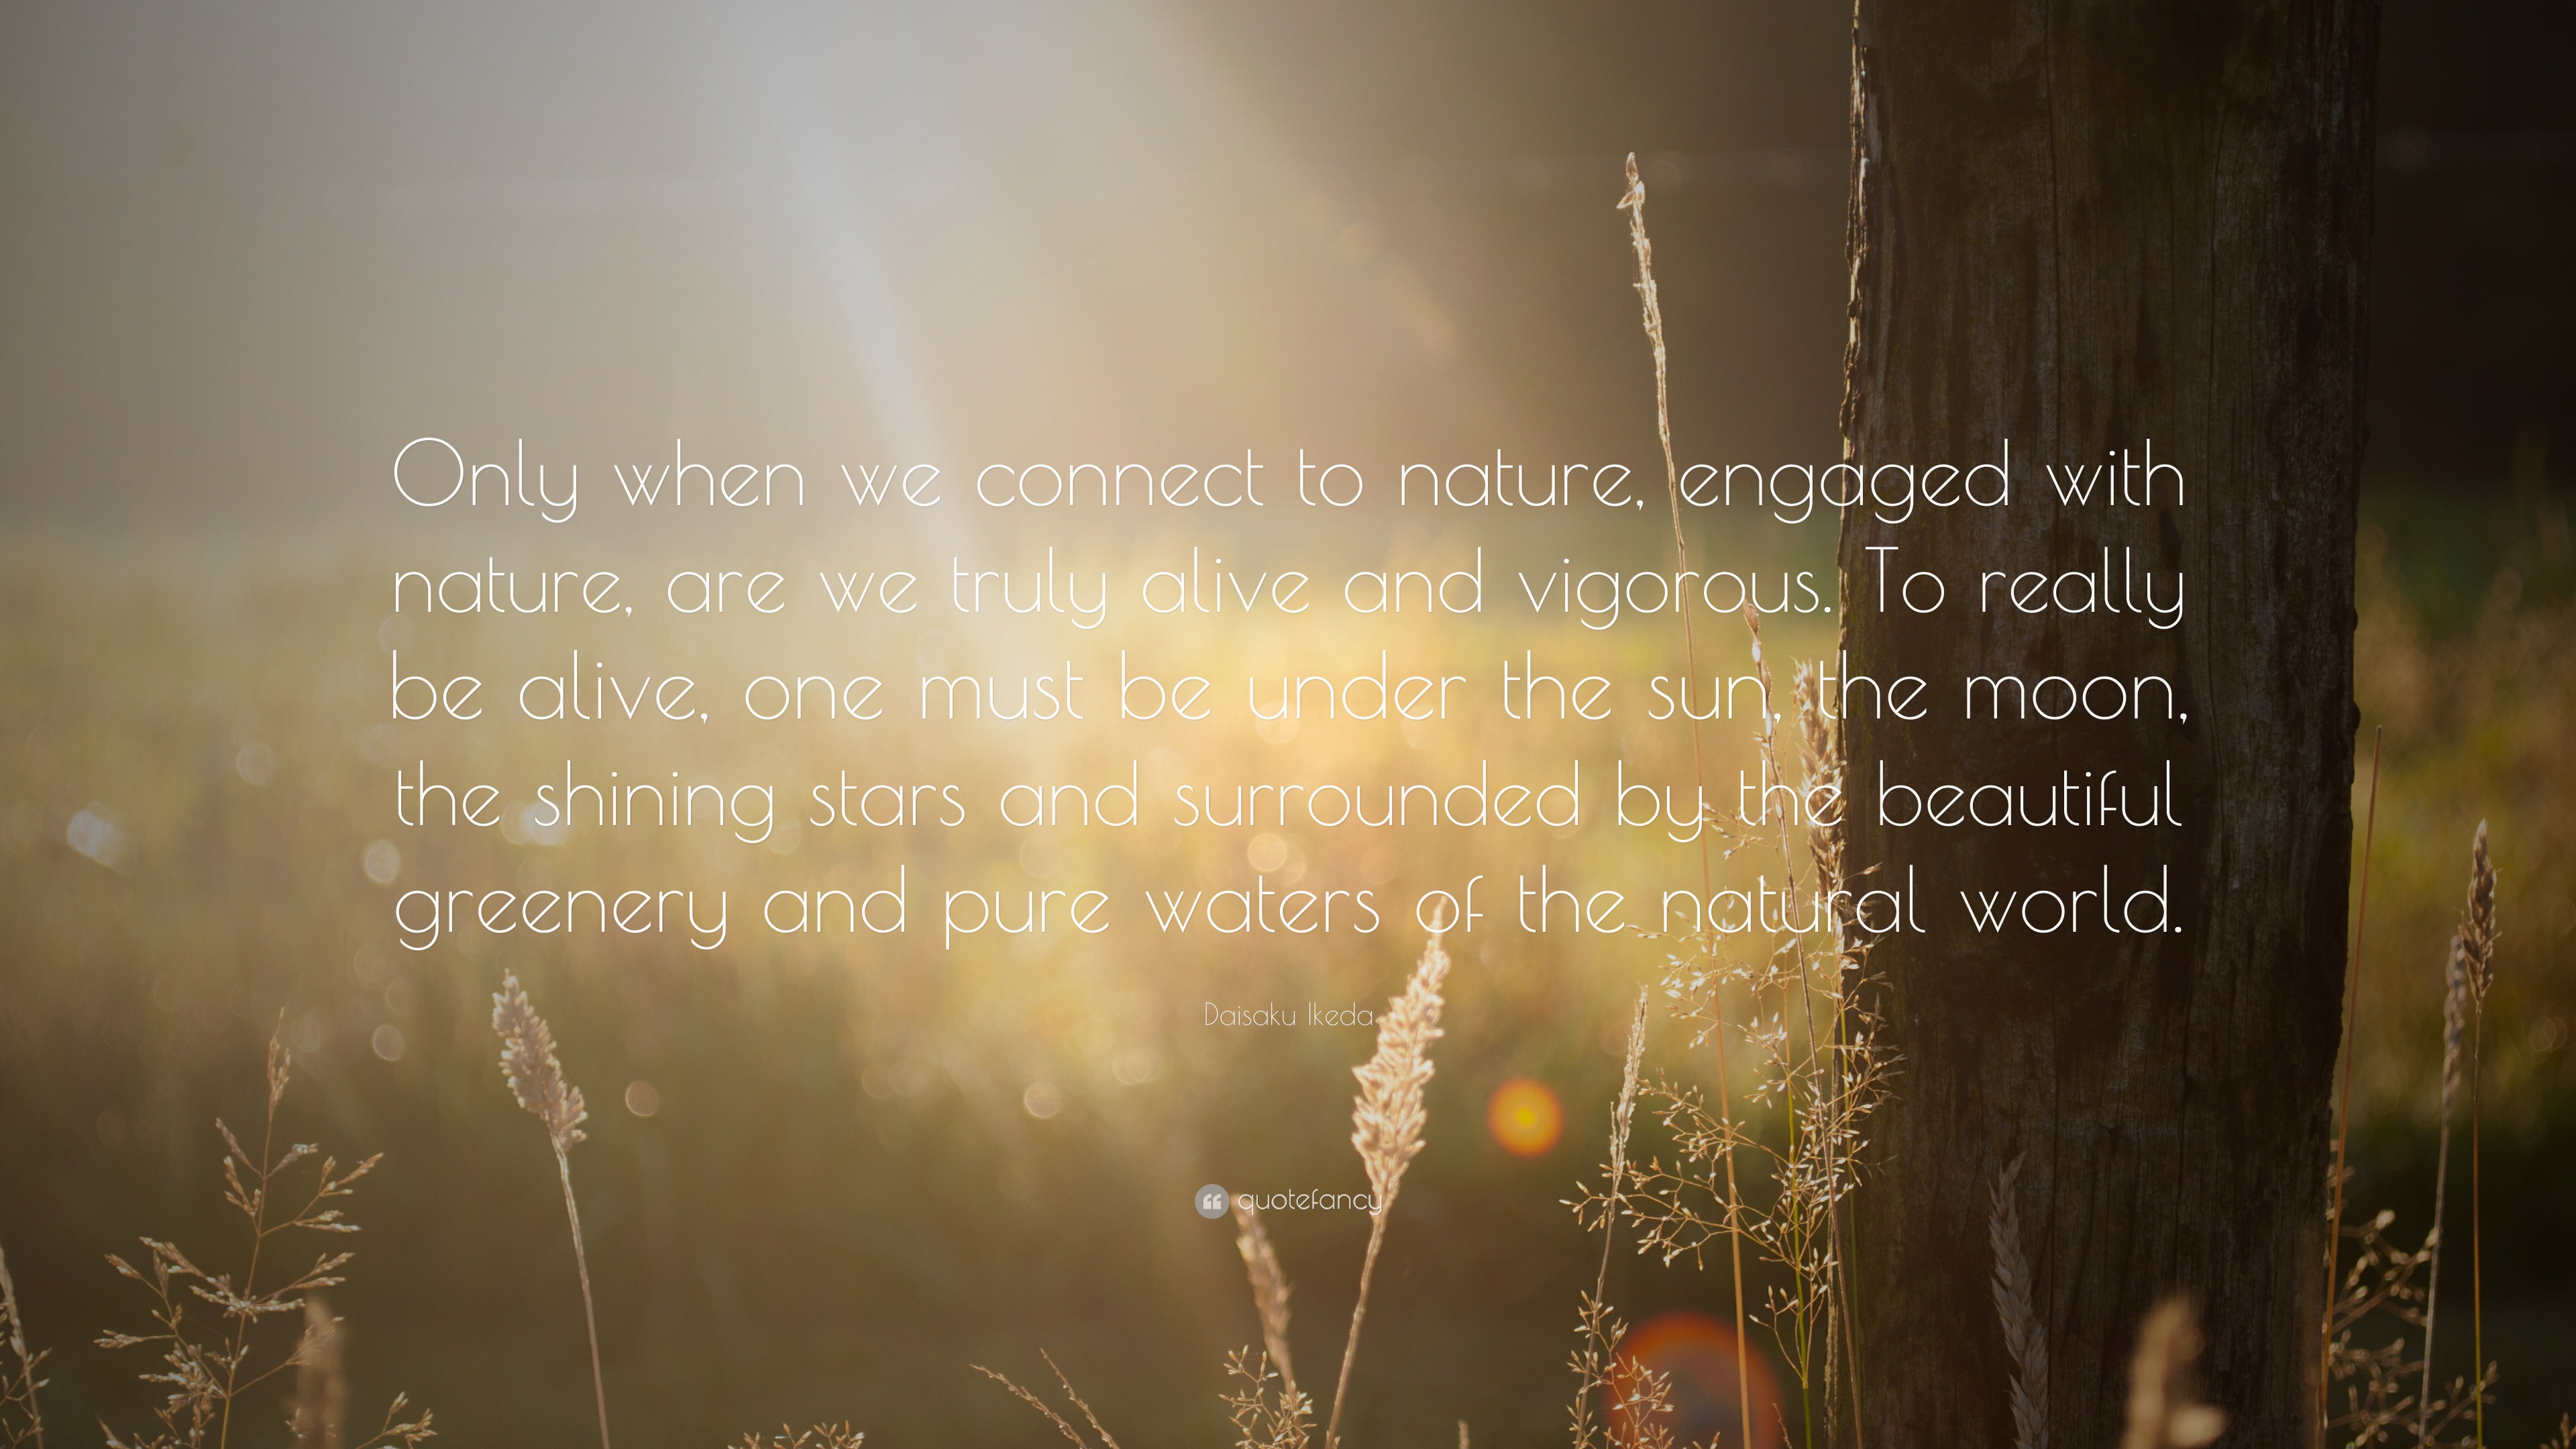 Daisaku Ikeda Quote: “Only when we connect to nature, engaged with ...